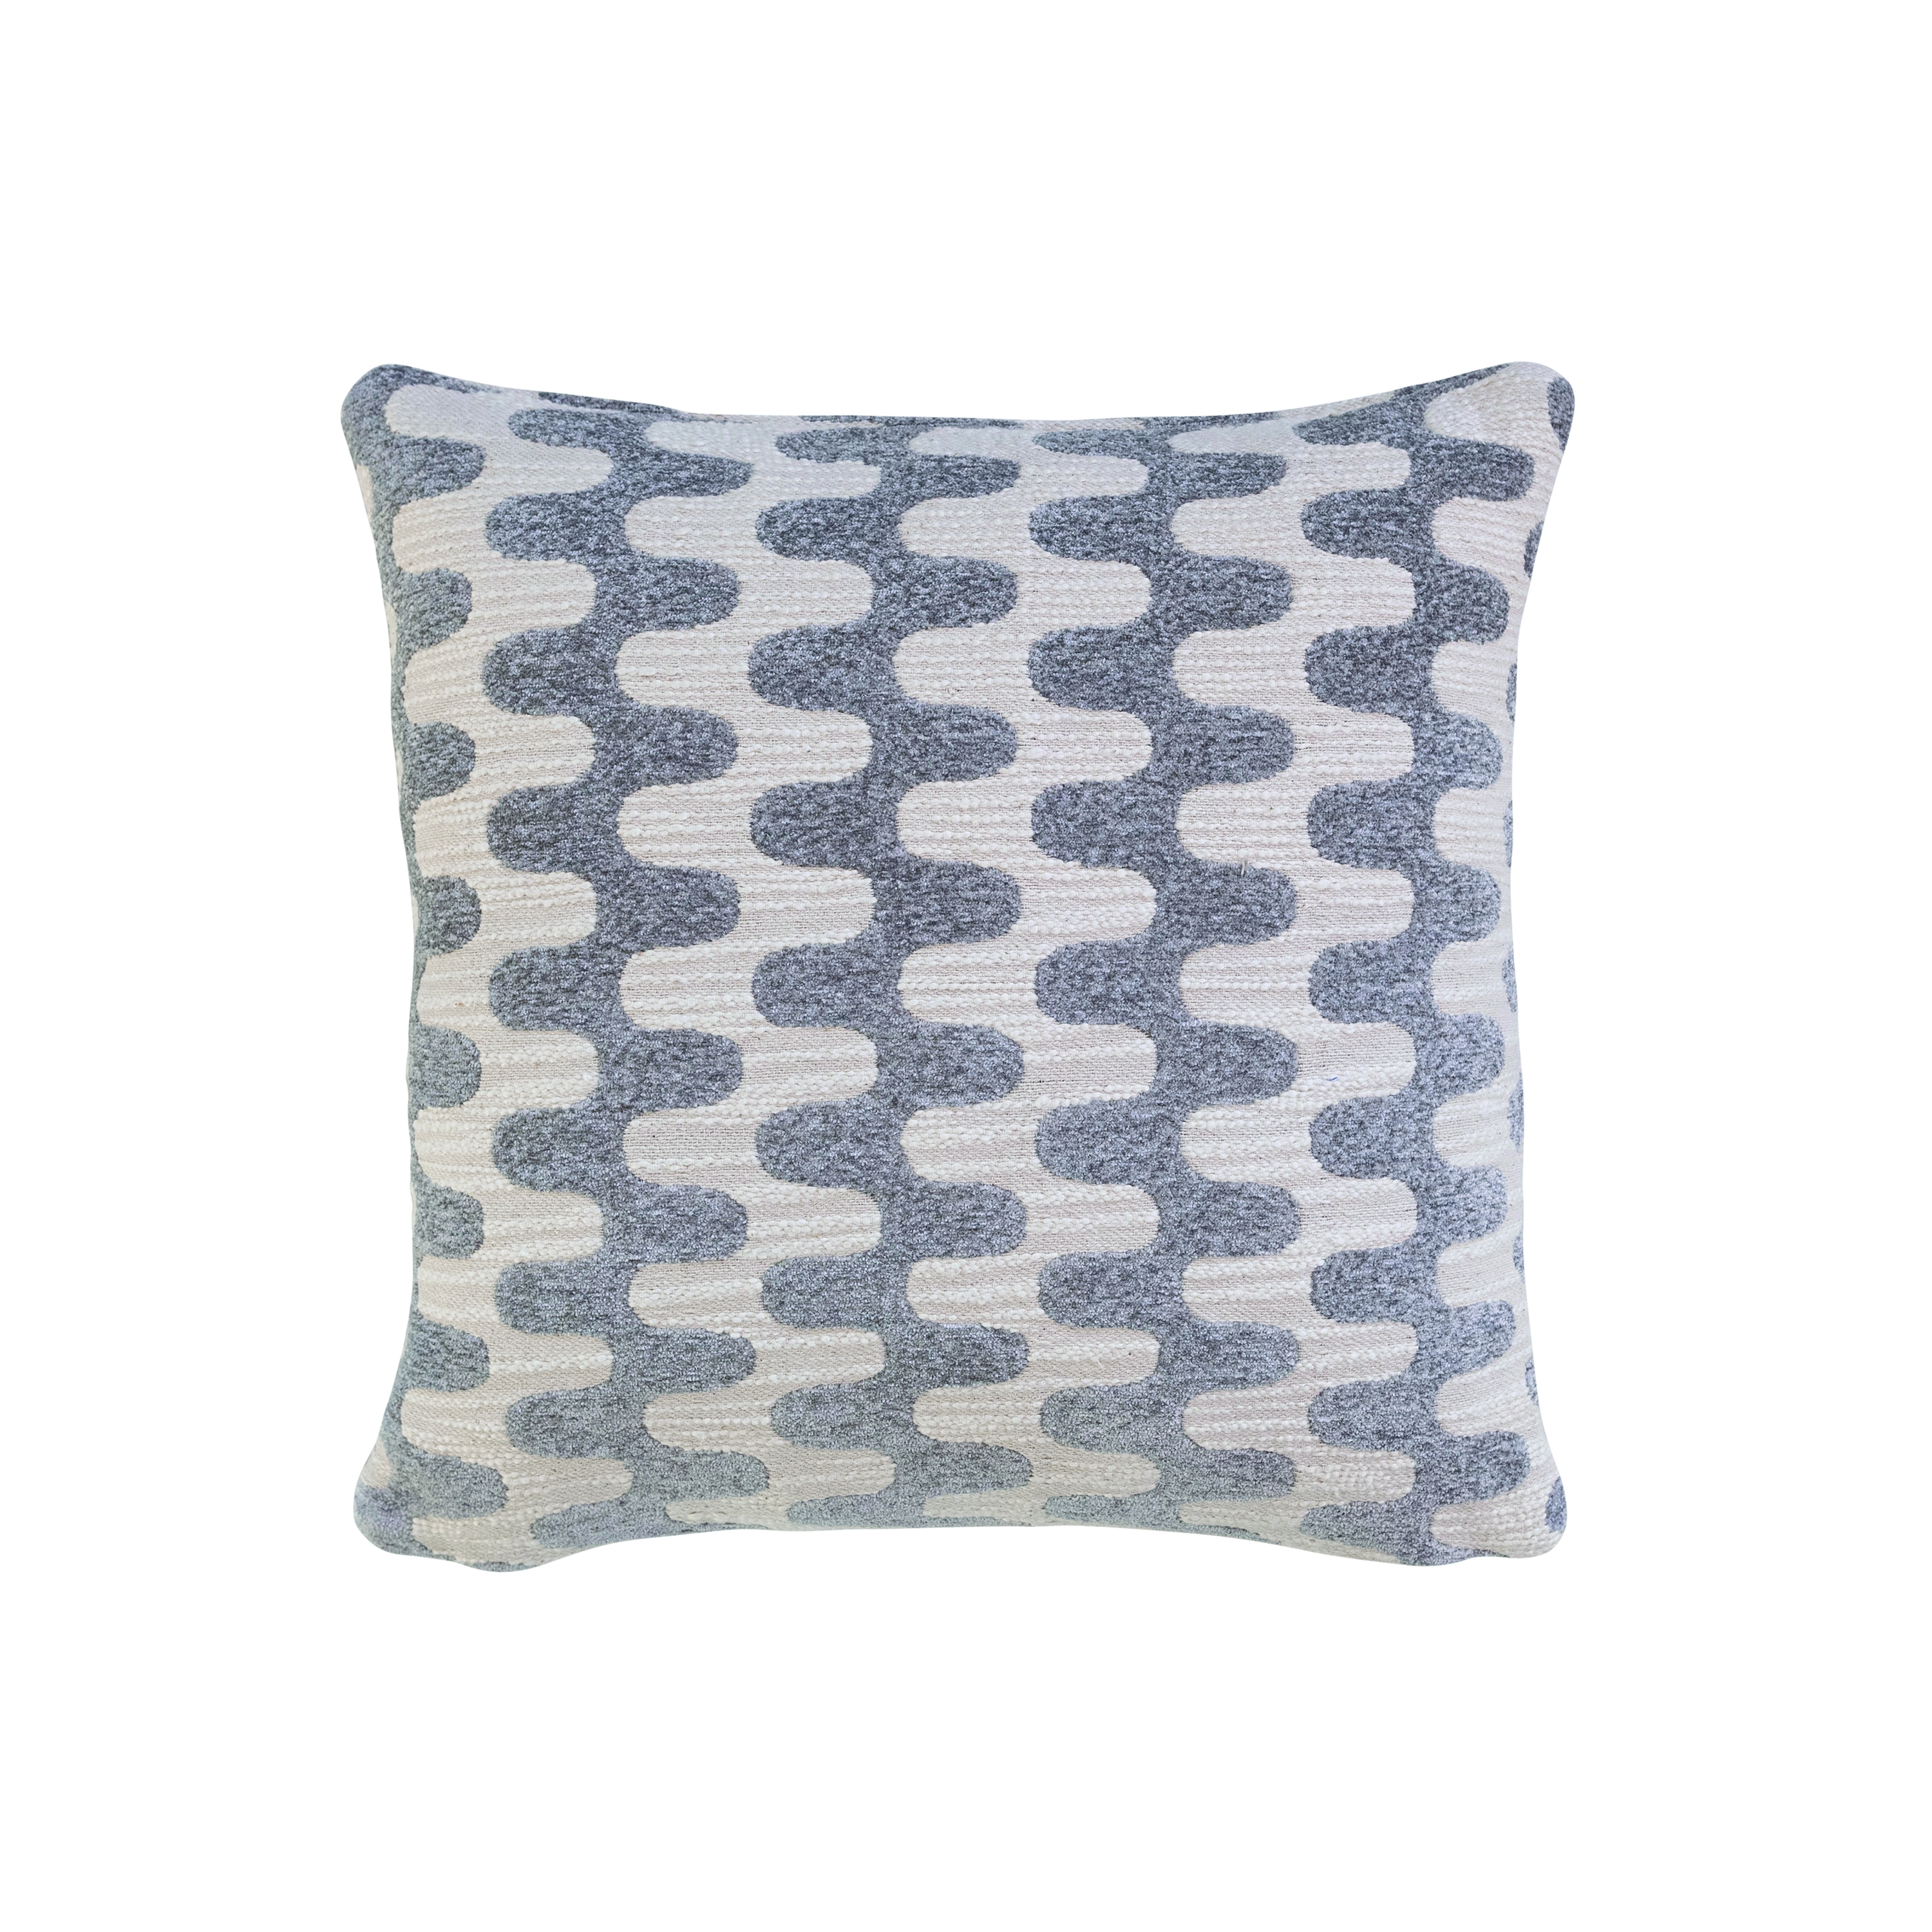 18 Inches Square Woven Cotton Jacquard Pillow with Abstract Pattern Design, Natural and Gray - Image 0